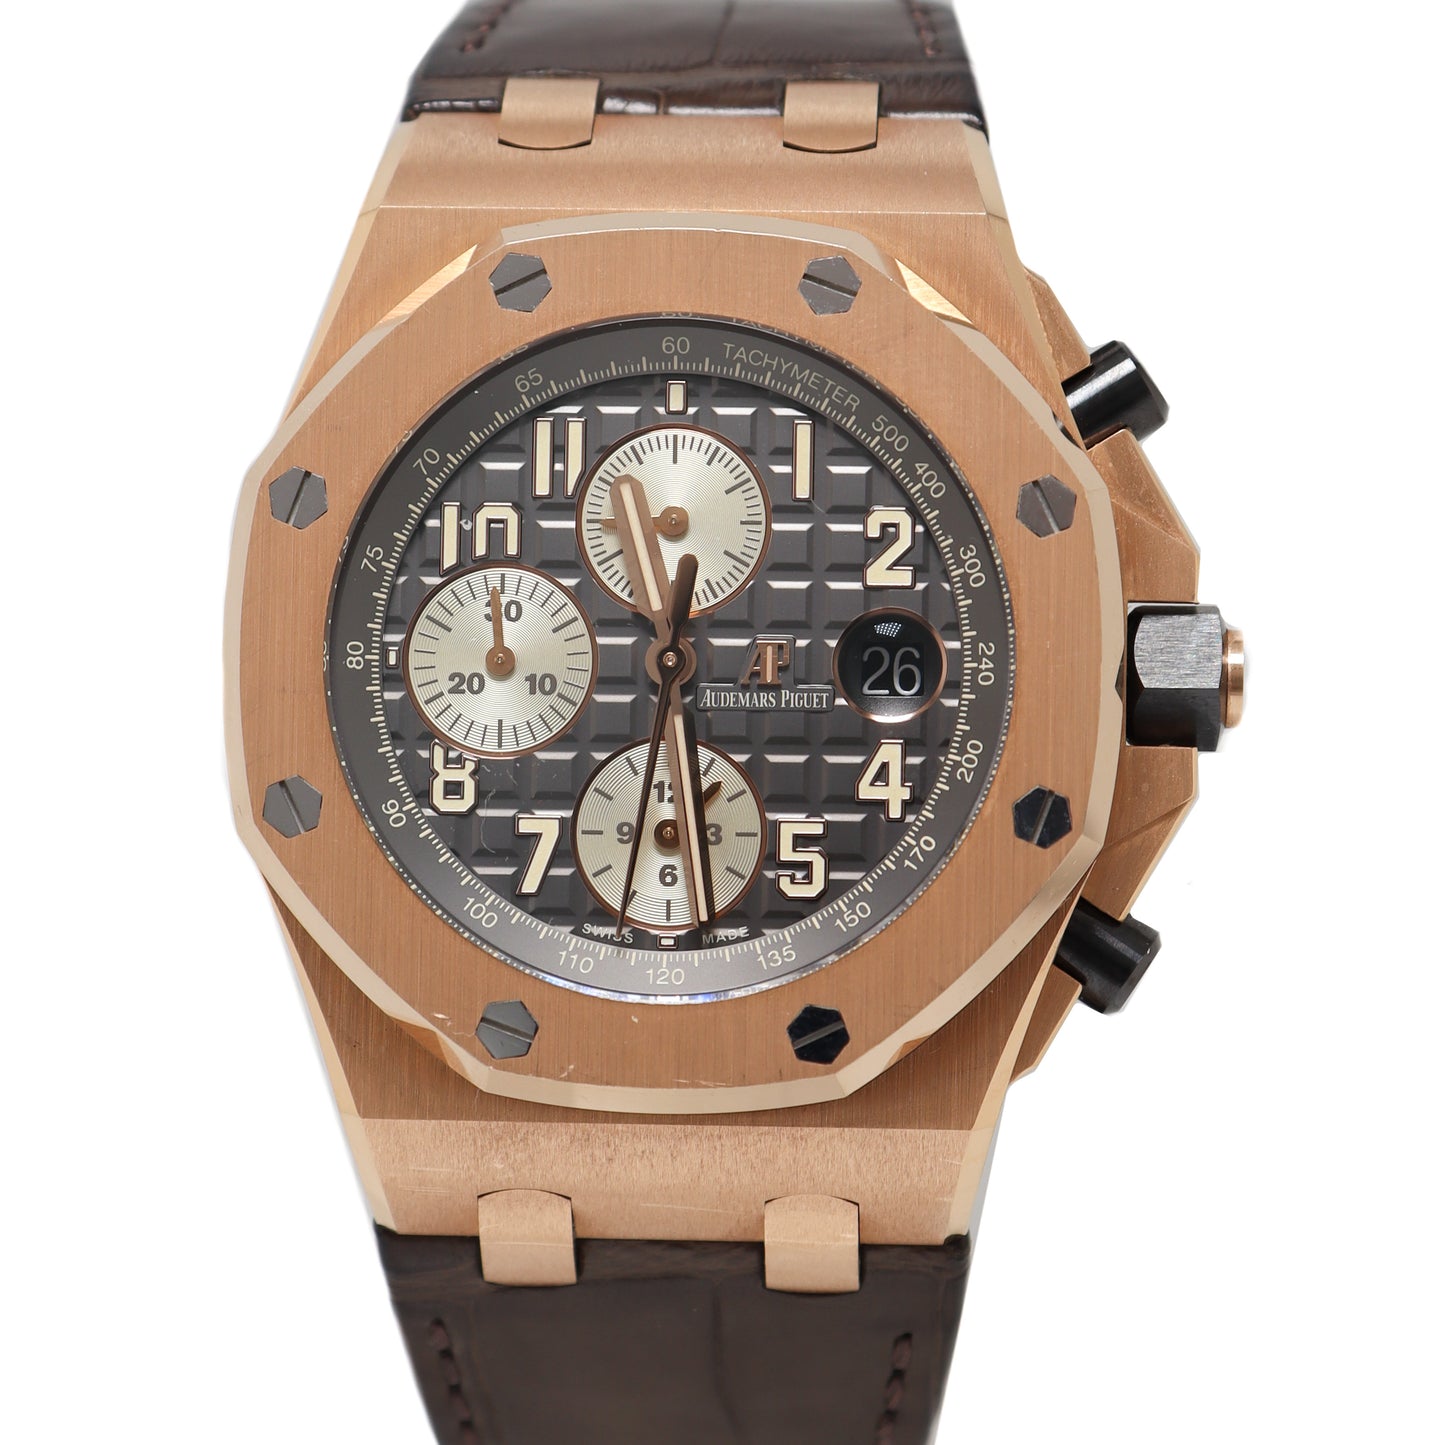 Audemars Piguet Royal Oak Offshore Rose Gold 42mm Grey Chronograph "Mega Tapisserie" Dial Watch Reference# 26470OR.OO.A125CR.01 - Happy Jewelers Fine Jewelry Lifetime Warranty